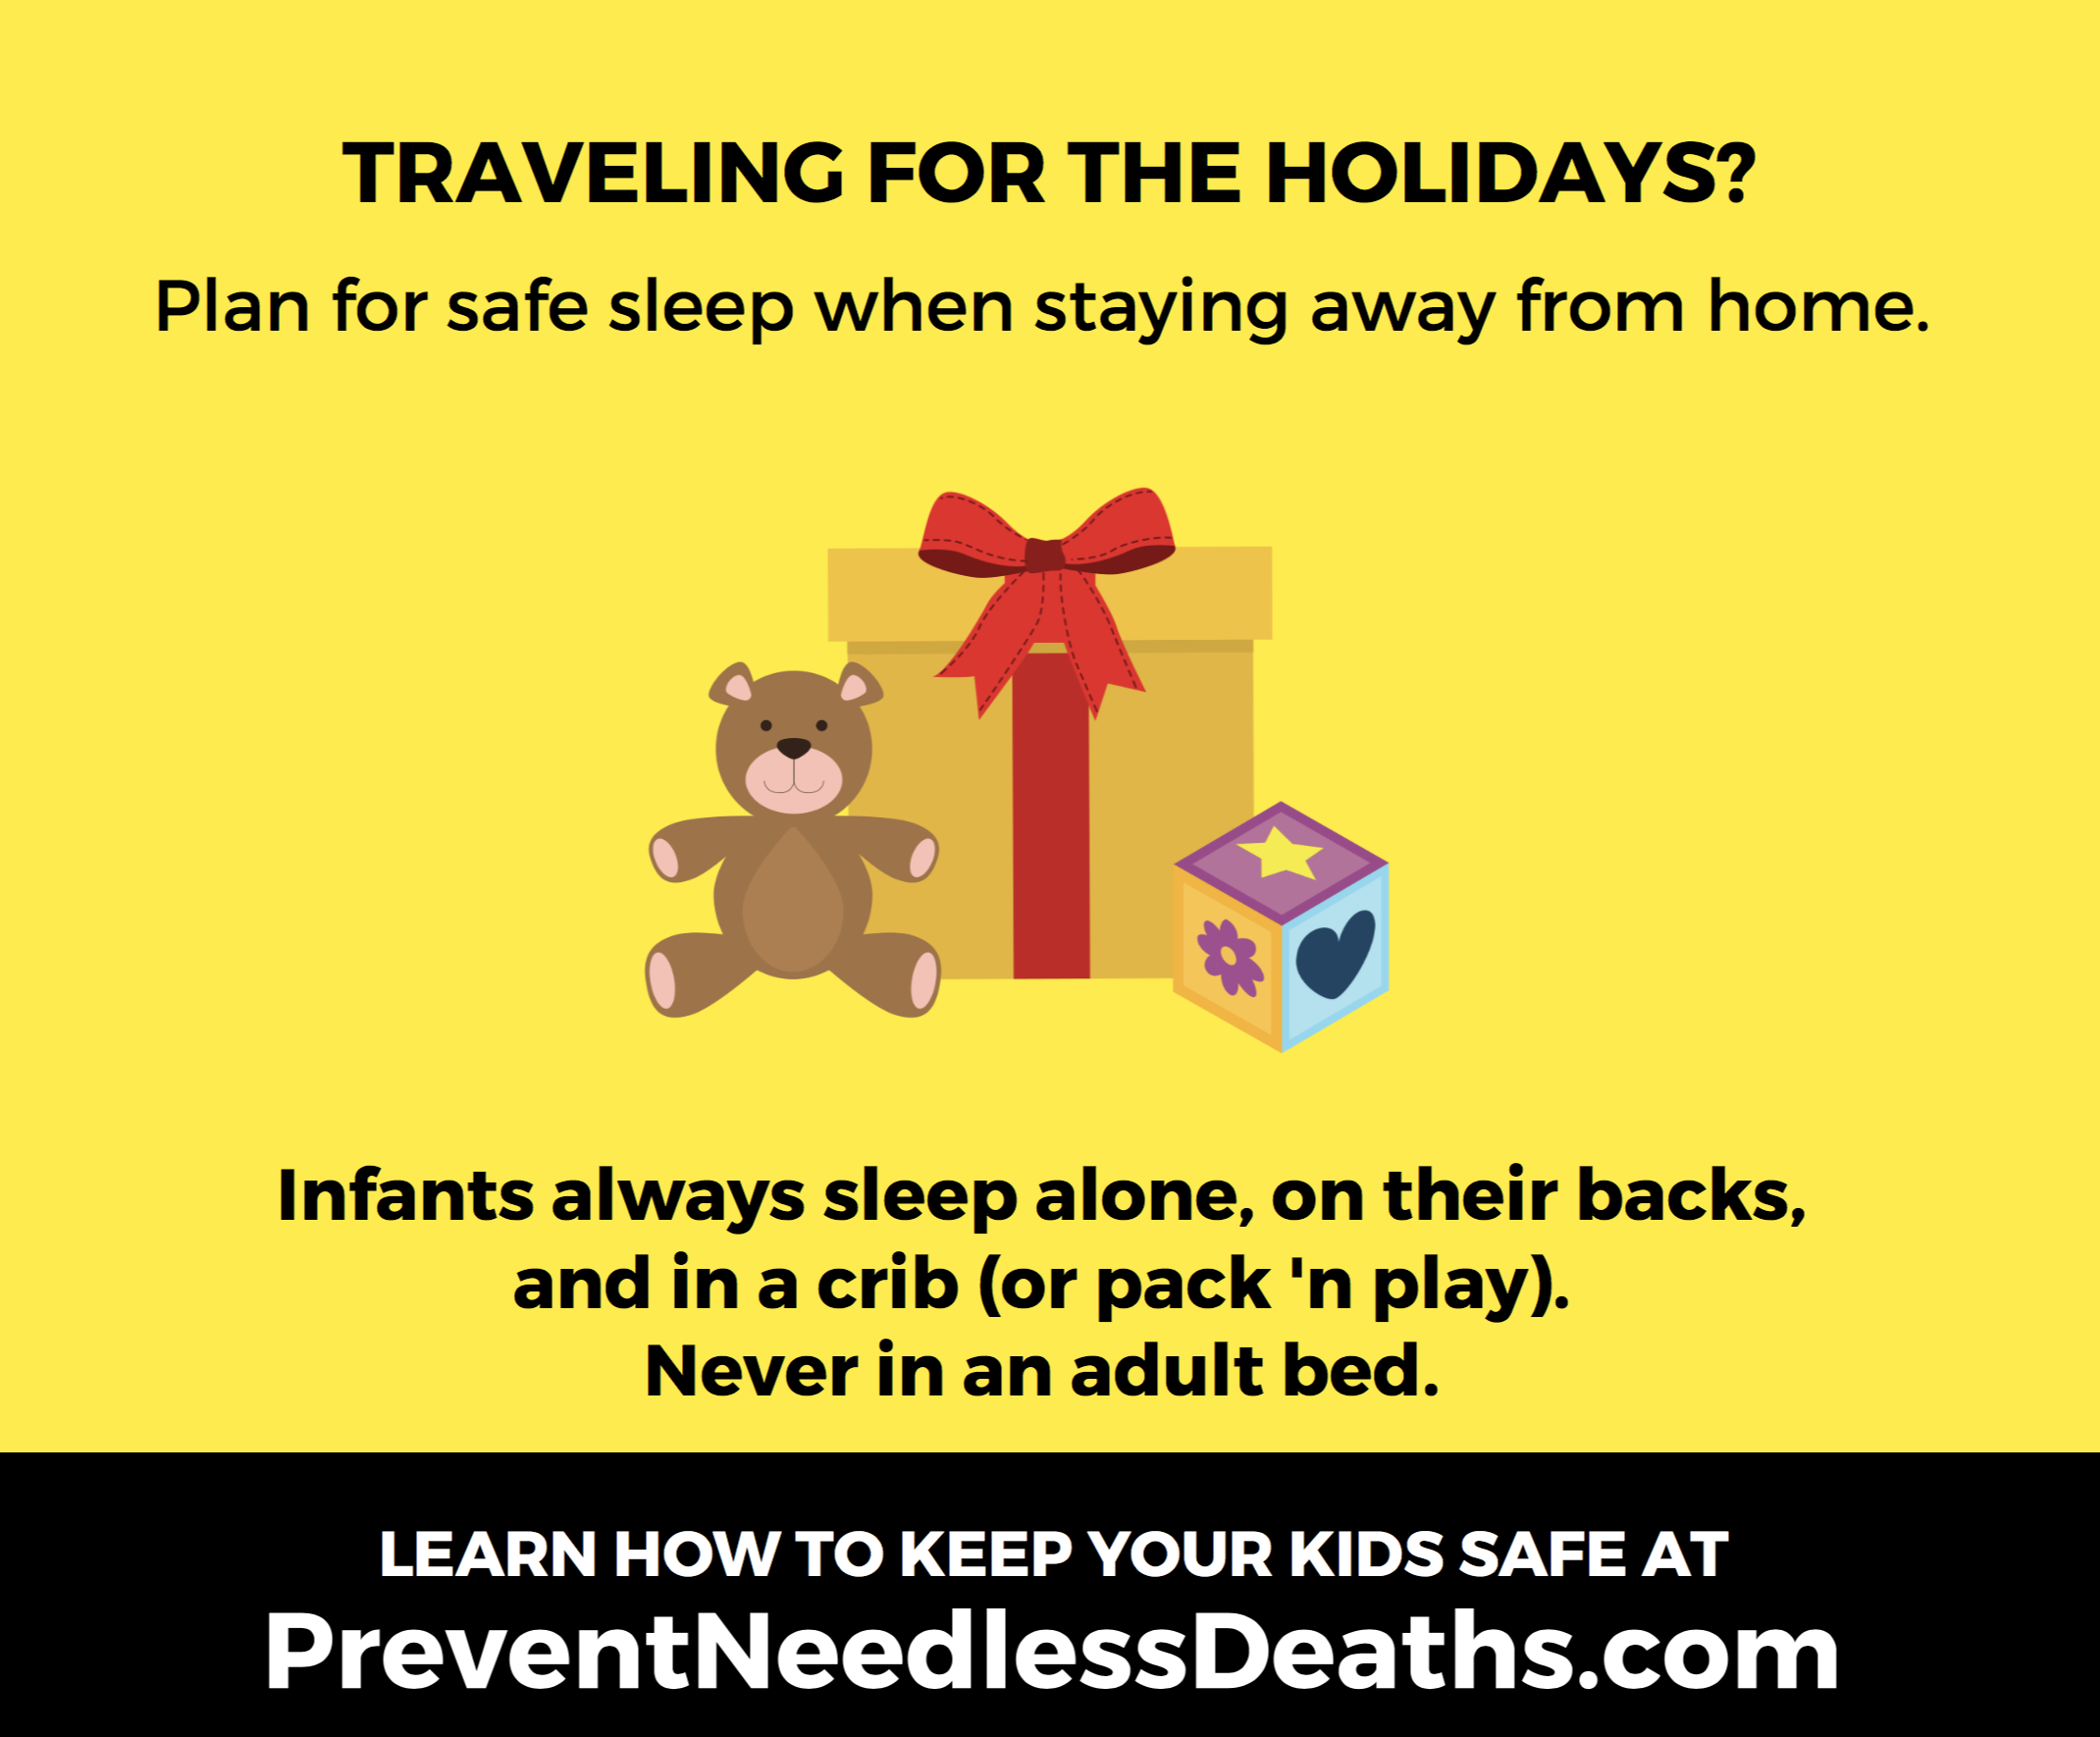 play for safe sleep when staying away from home